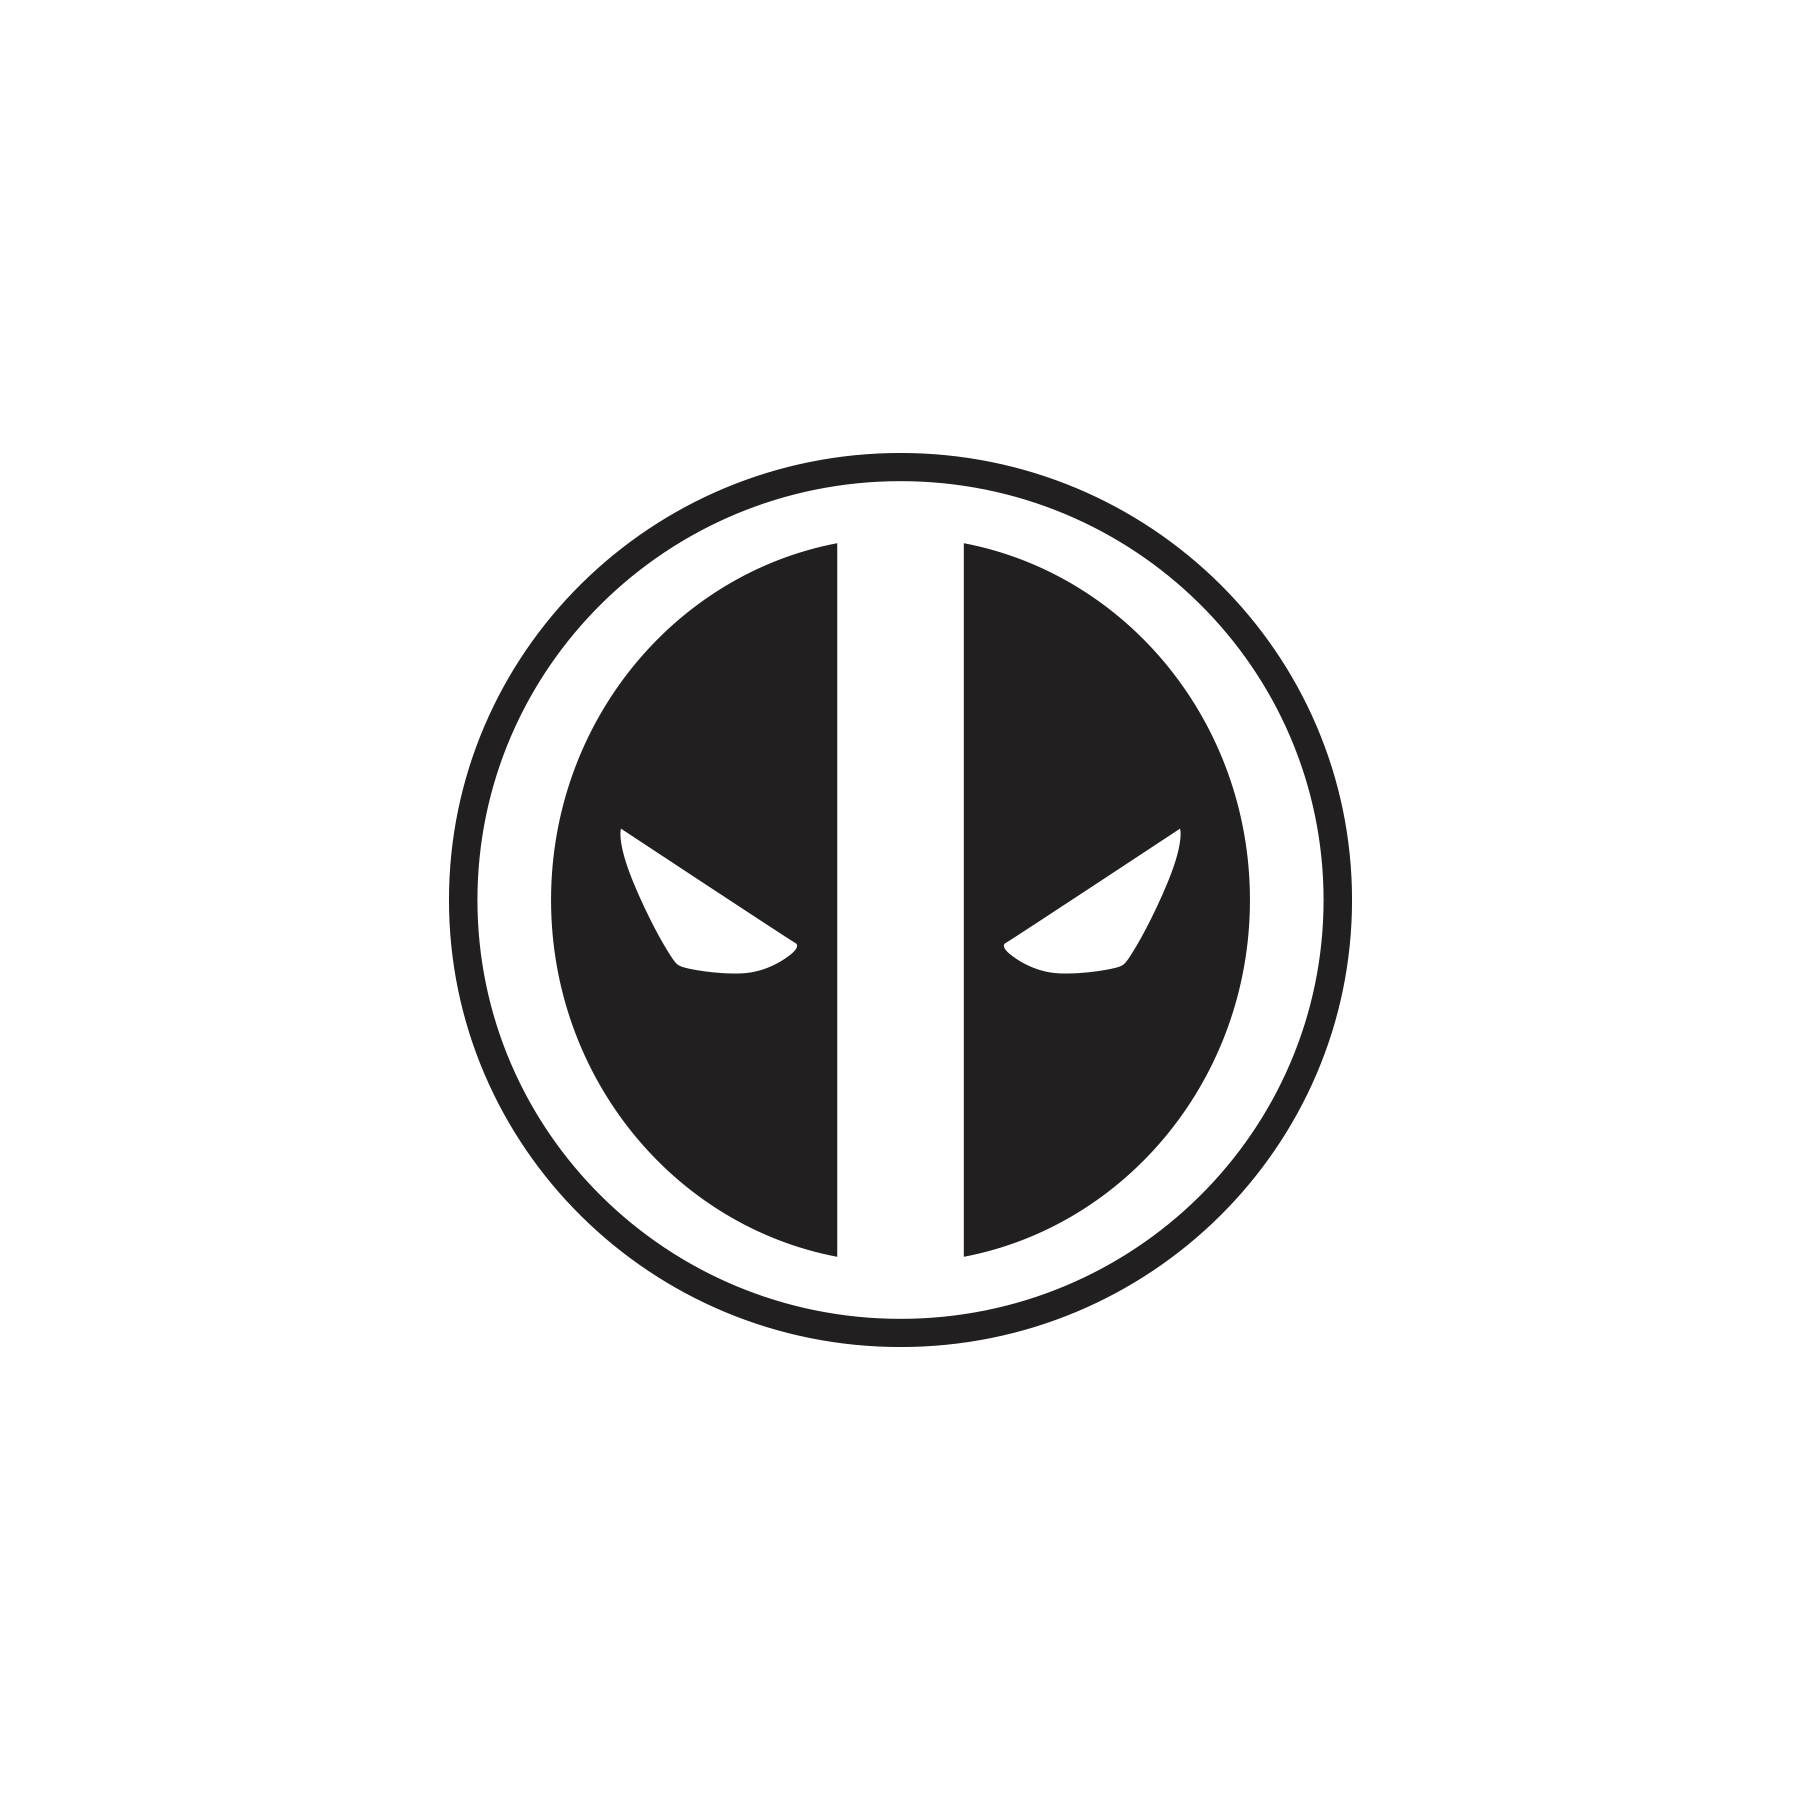 deadpool icon png